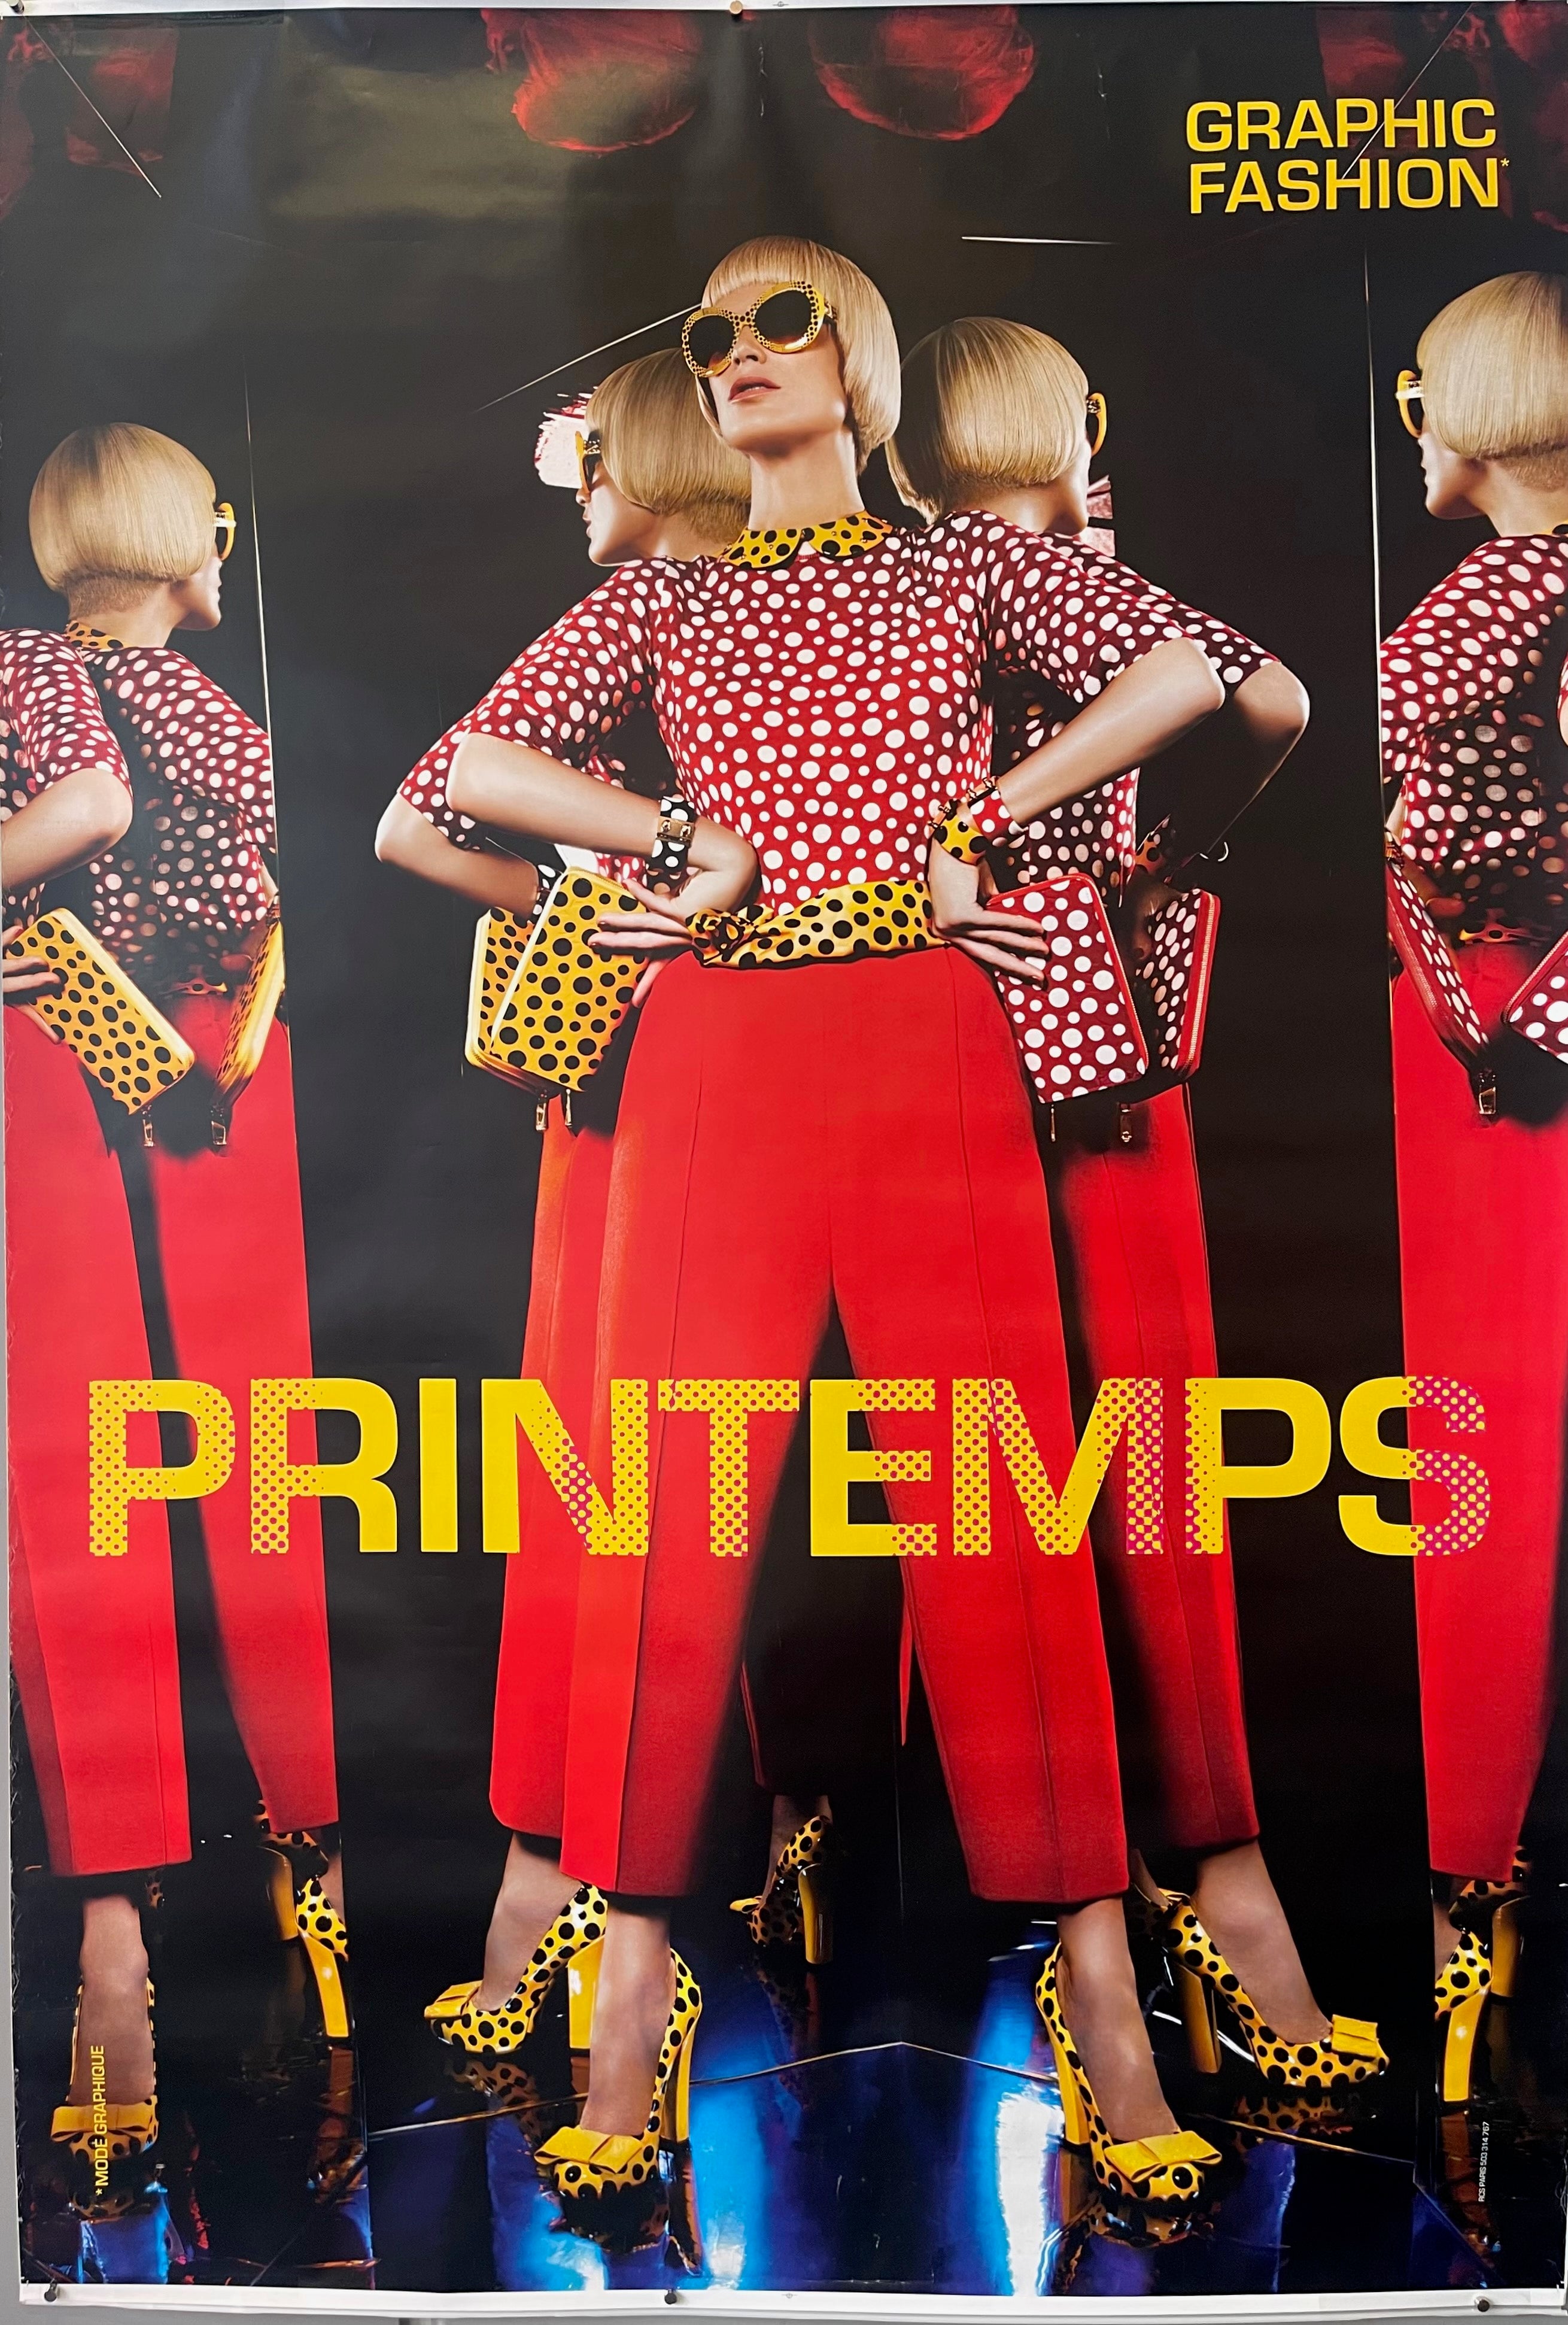 70x47 french magazine cover for clothing store printemps featuring woman wearing bright colorful polka dot outfit reflected in multiple mirrors